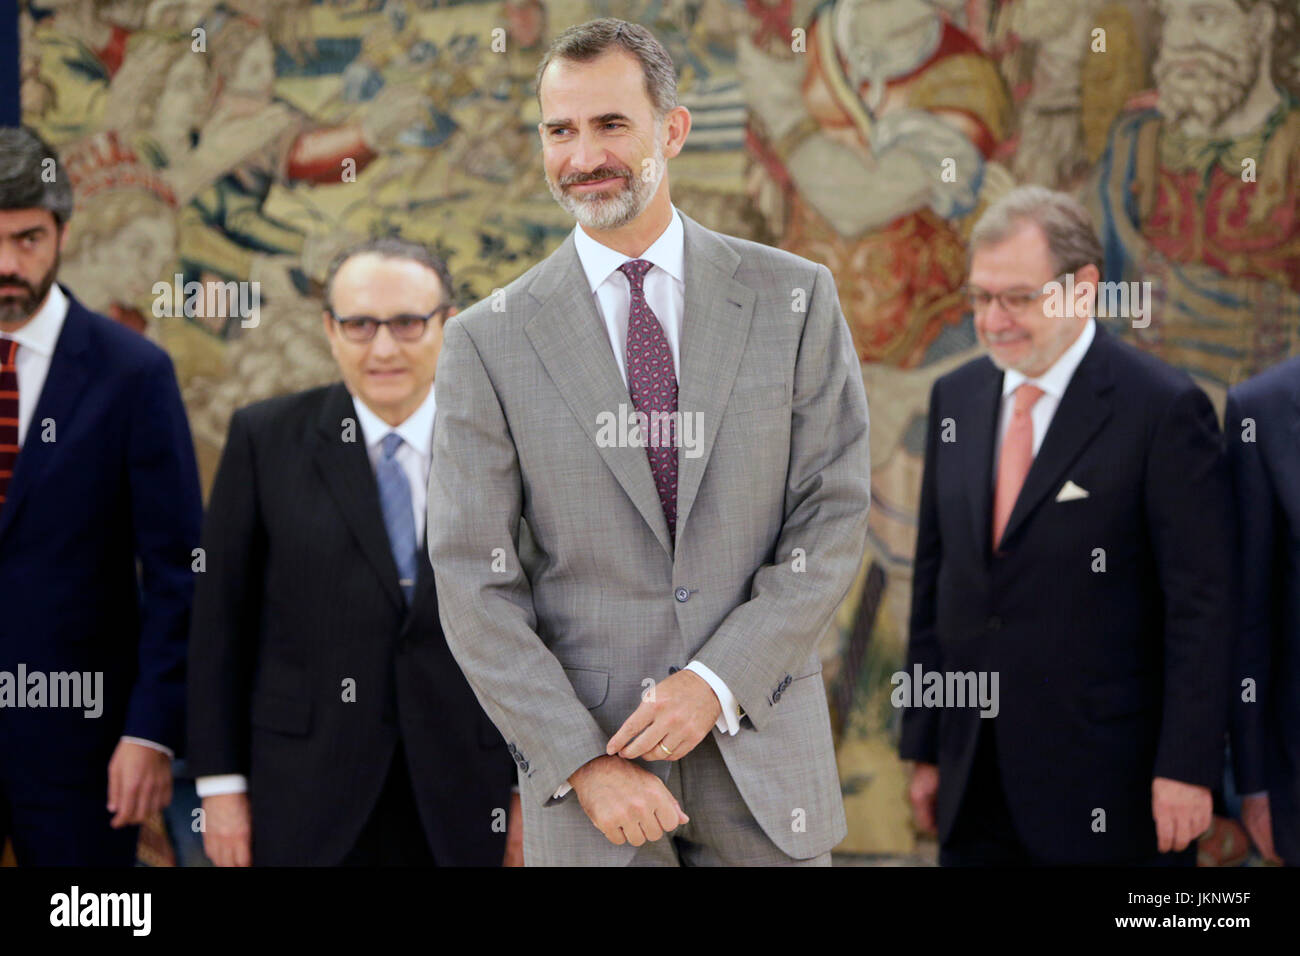 Madrid, Spain. 24th July, 2017. King Felipe VI of Spain during a audience with the Executive Commission of the Information Media Association at the Palacio de la Zarzuela in Madrid Monday 24 July 2017 Credit: Gtres Información más Comuniación on line,S.L./Alamy Live News Stock Photo